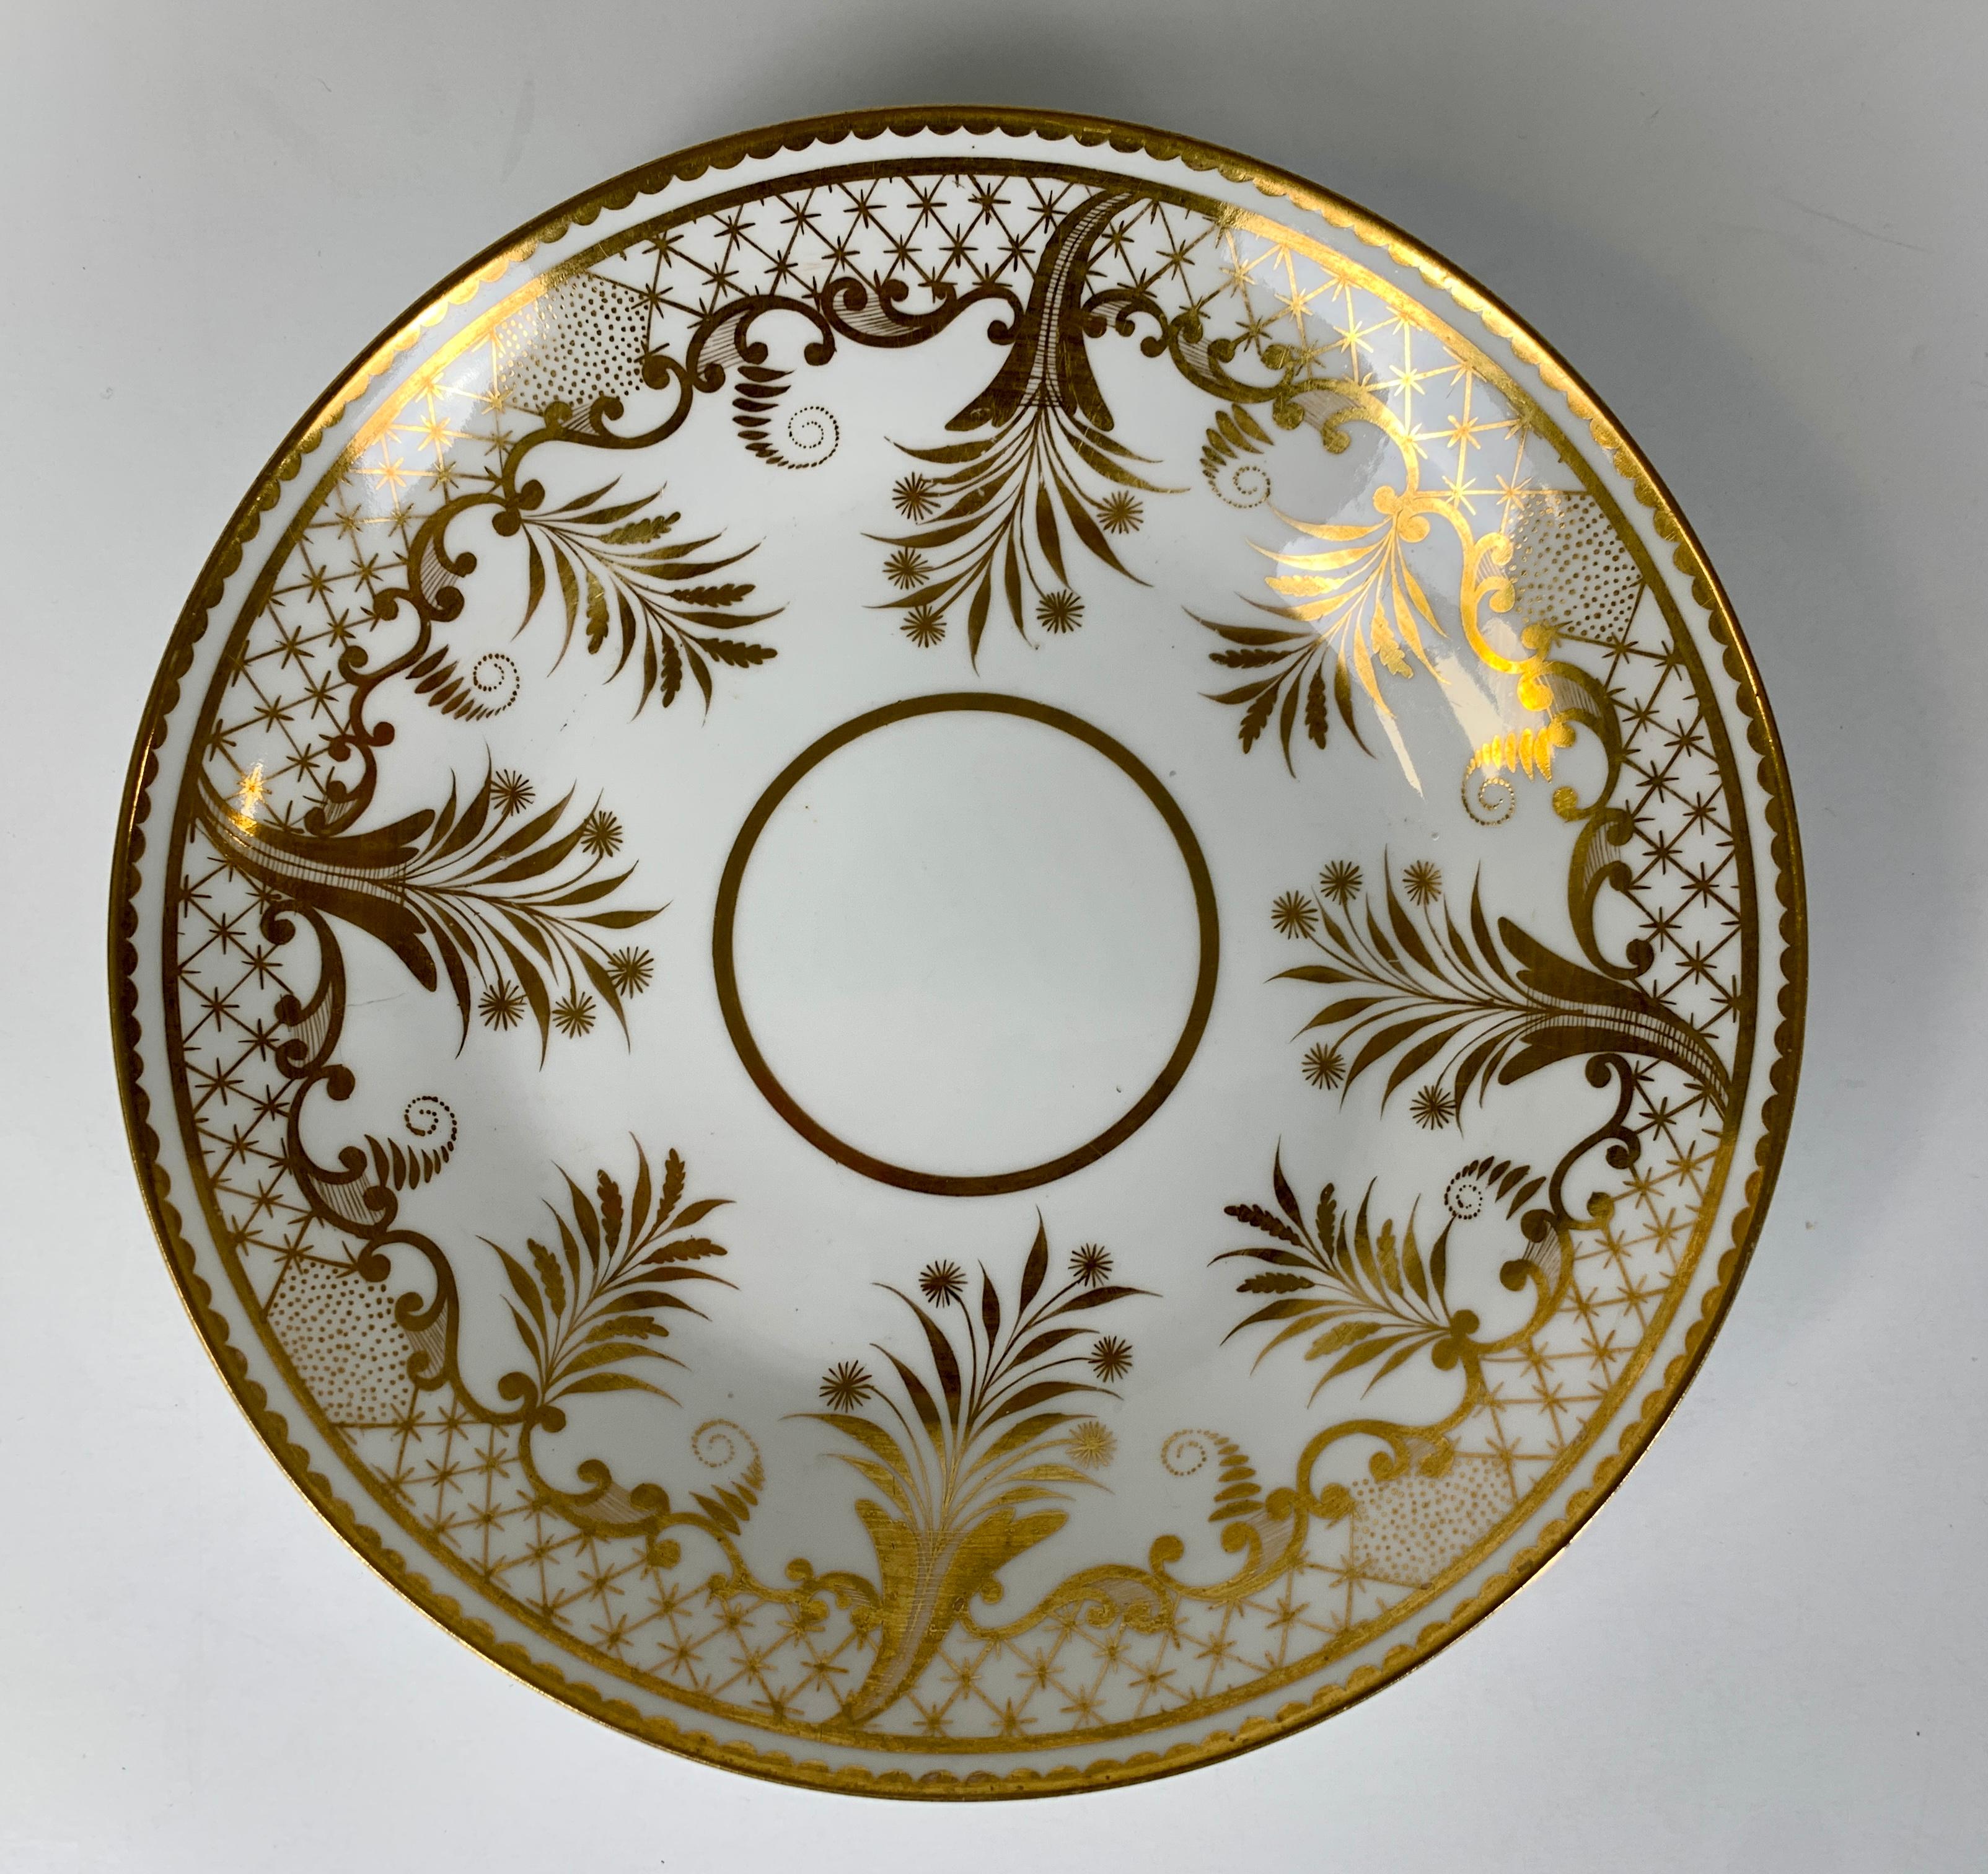 Provenance: The Private Collection of Mario Buatta a pair of white and gold dishes
Made in England, circa 1820
These beauties have a gilded edge with a dentil decoration, a border of 